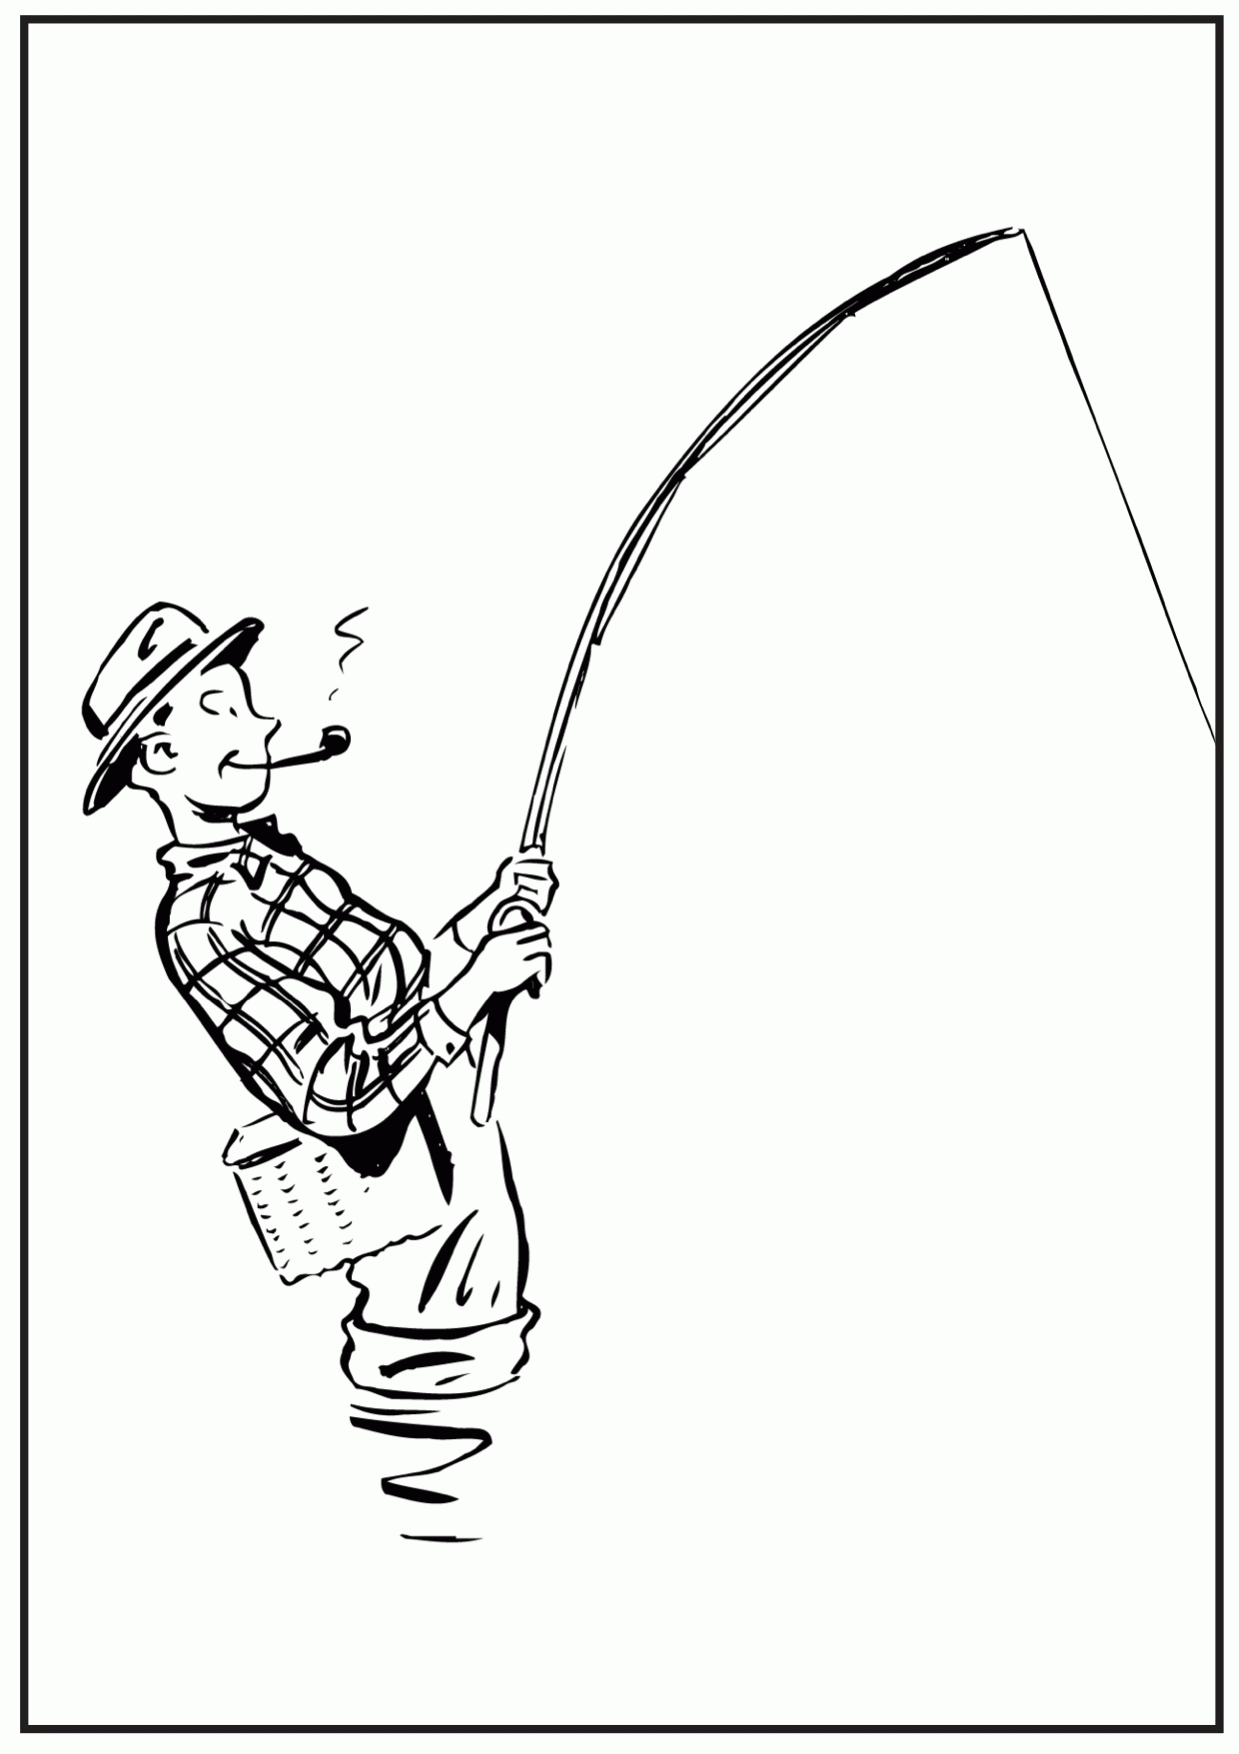 Boy Fishing Coloring Page